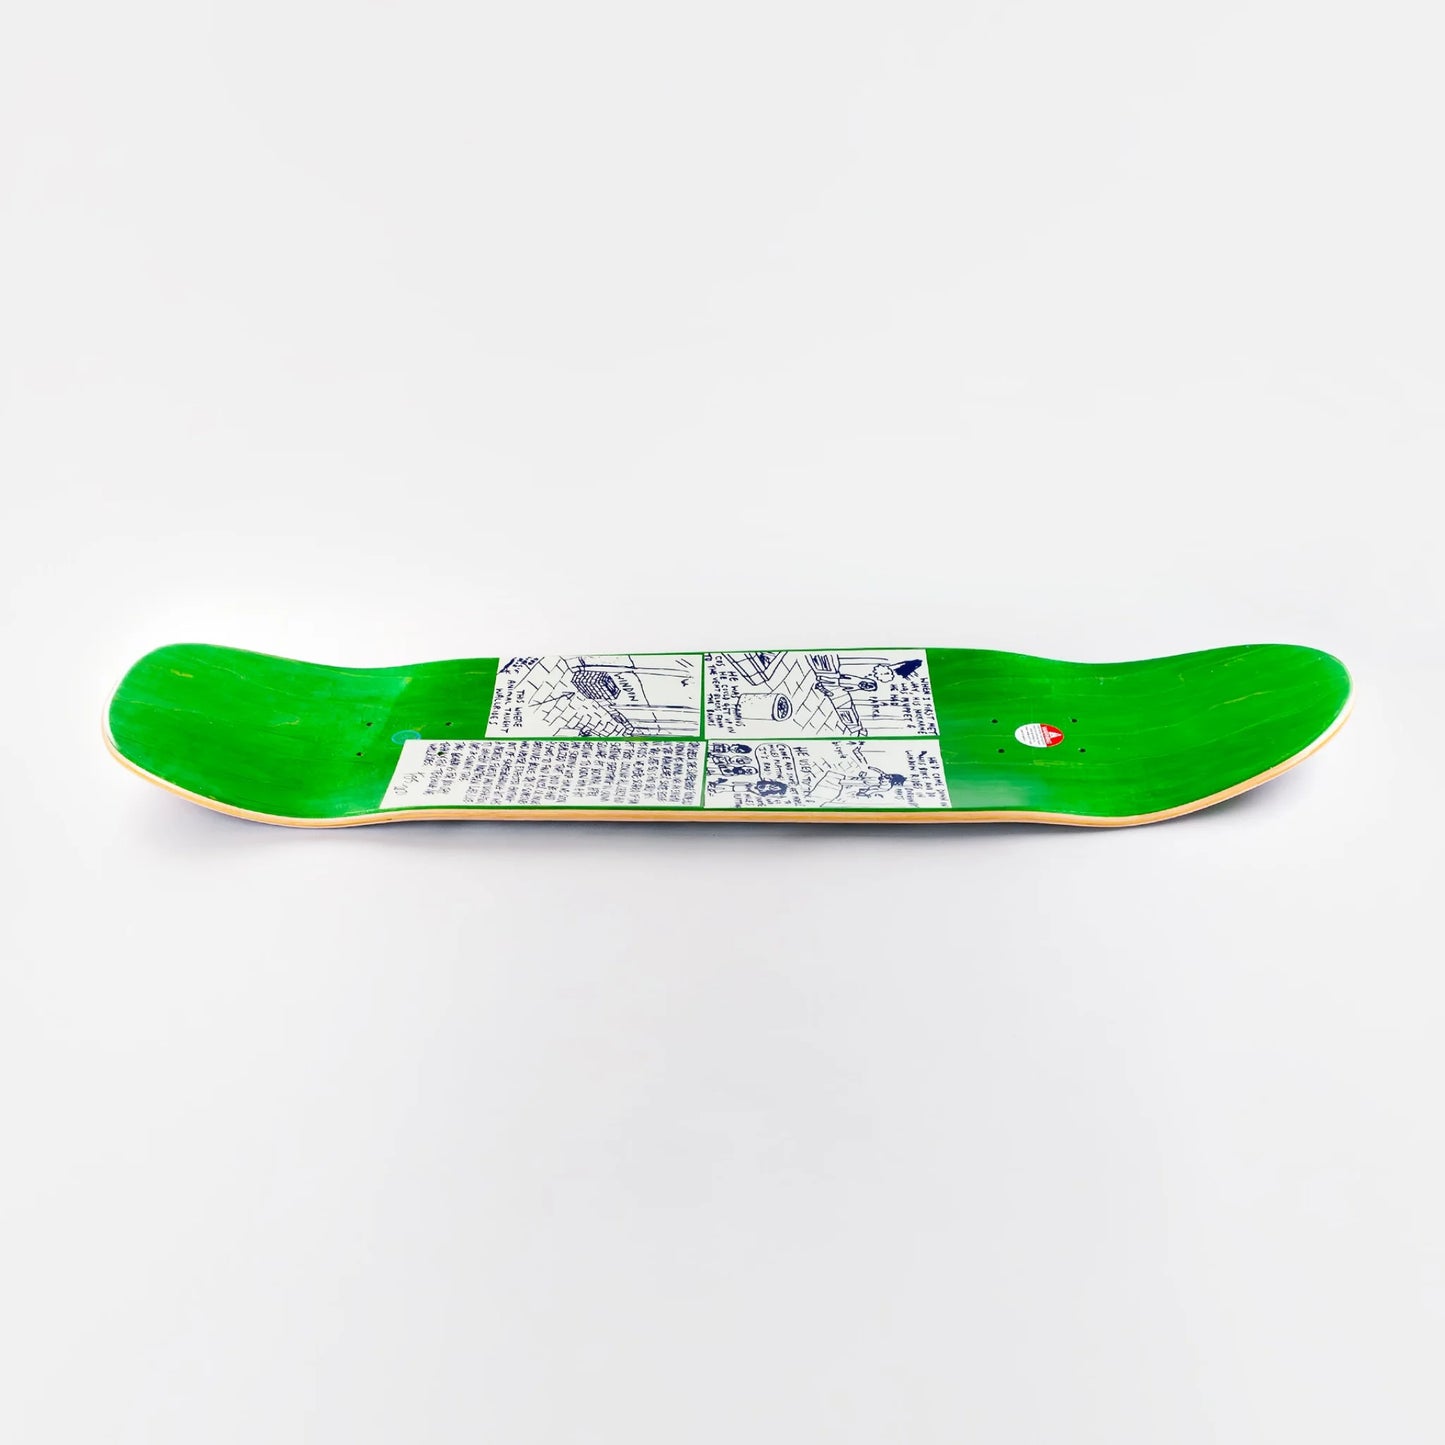 Heroin 8.88" Jay Green Manchester Deck - White - Prime Delux Store